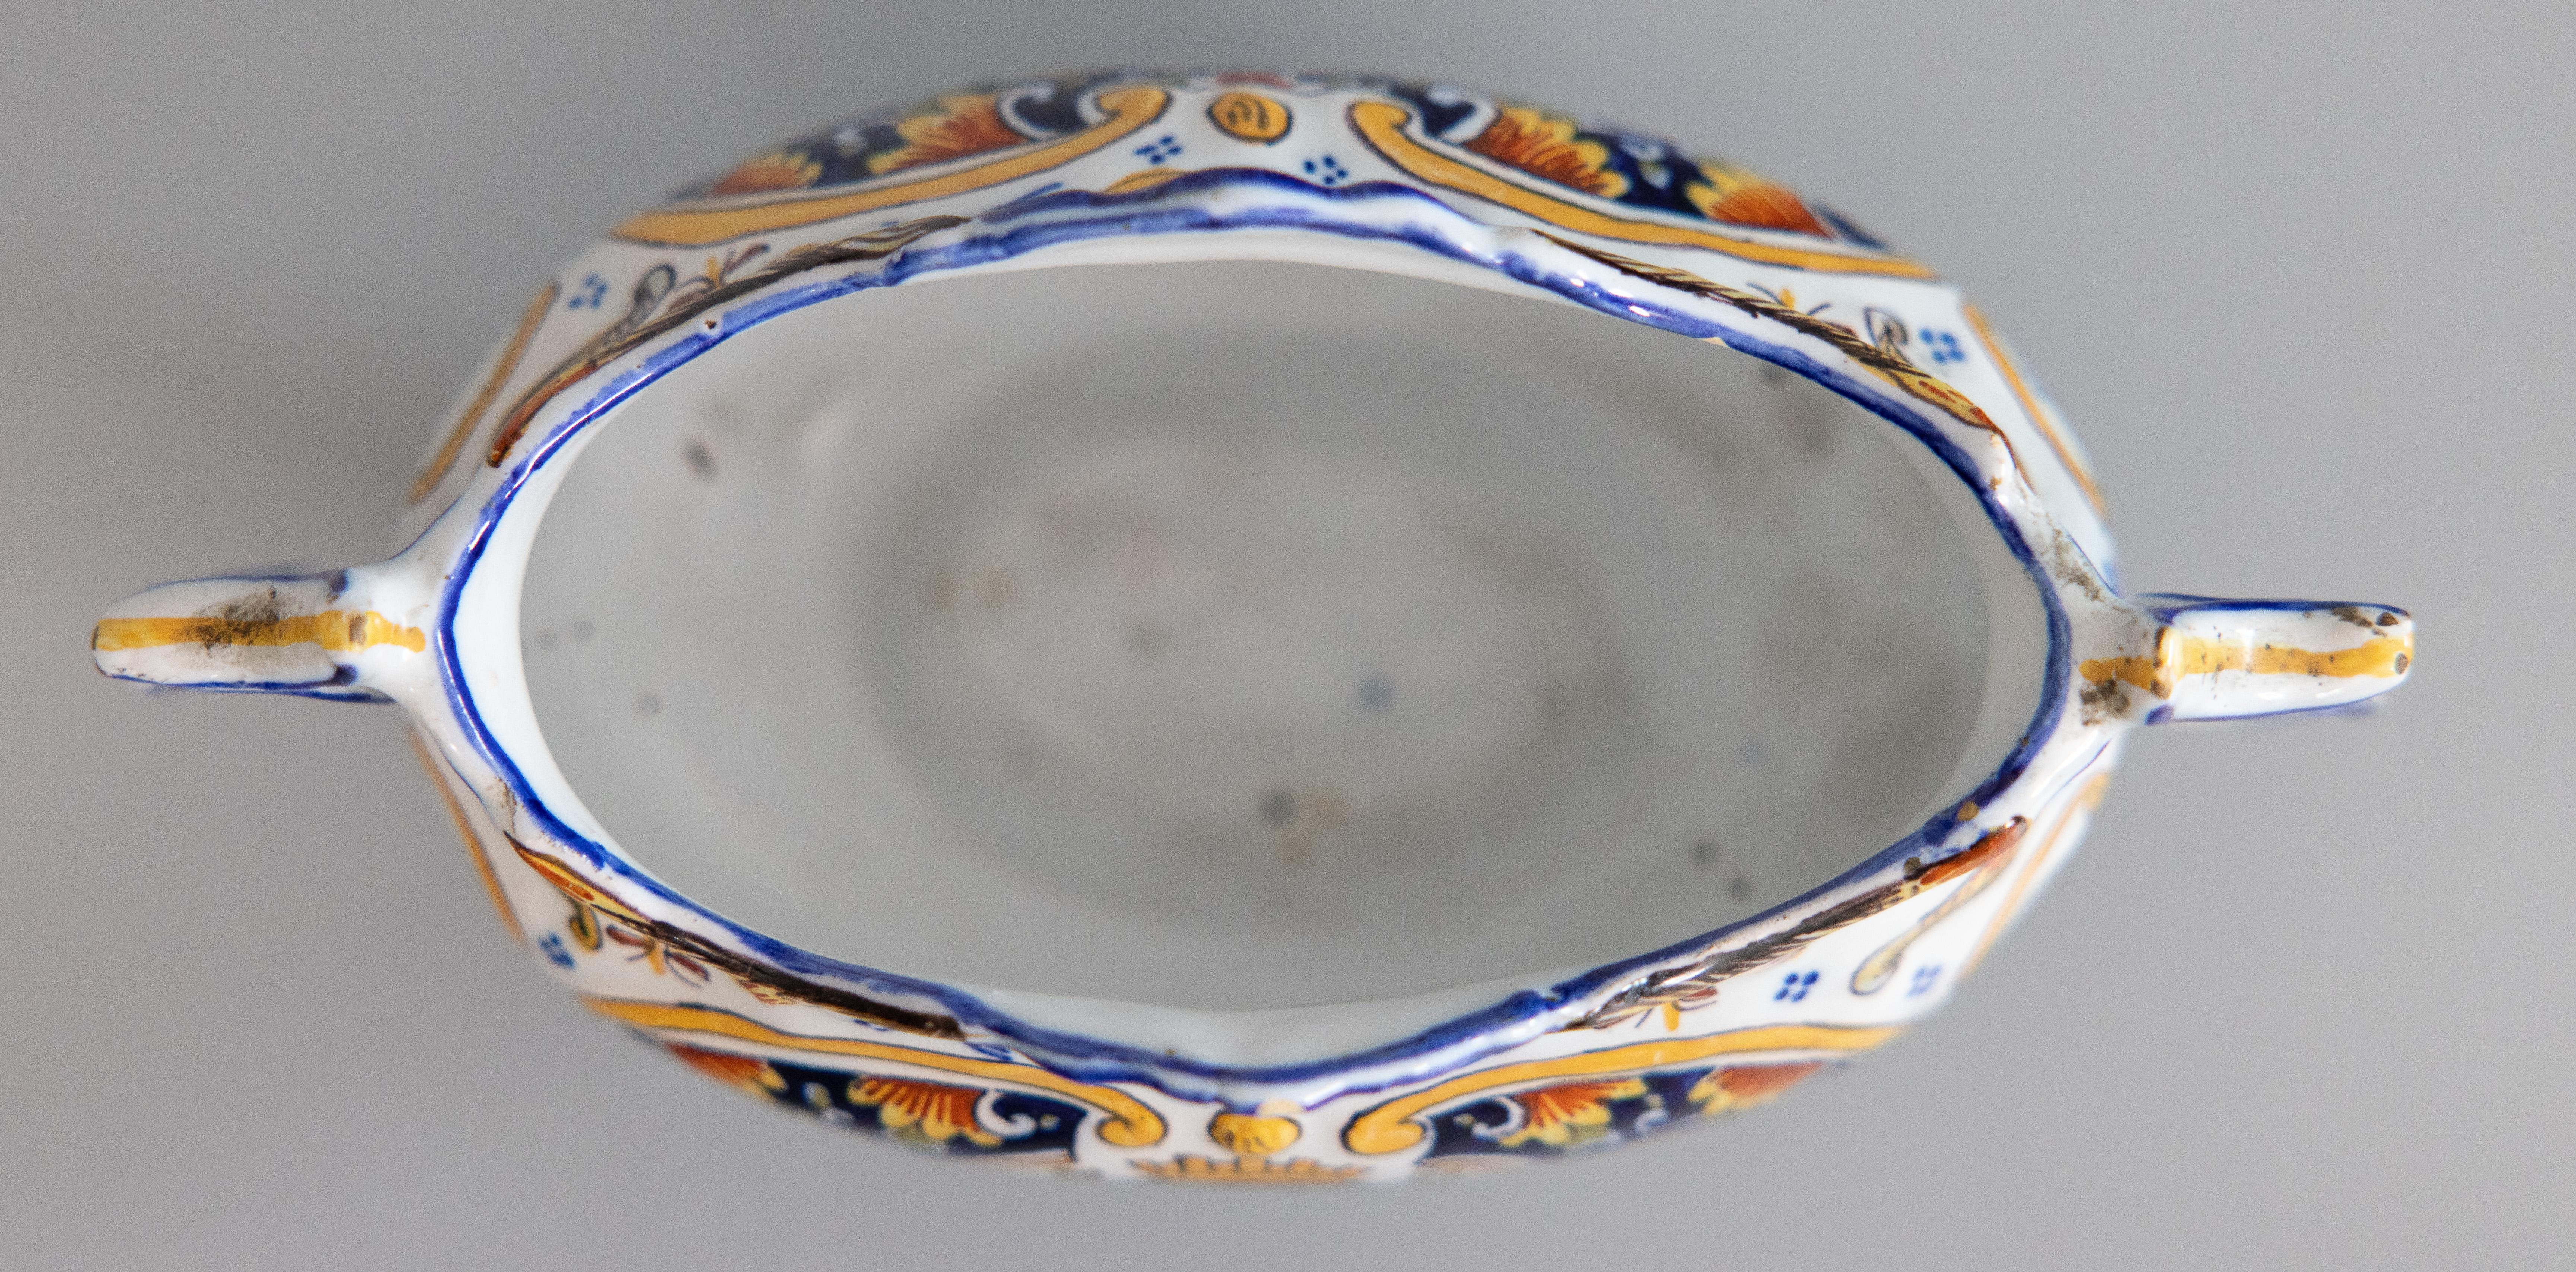 Antique French Rouen Faience Jardiniere Cachepot, circa 1900 In Good Condition For Sale In Pearland, TX